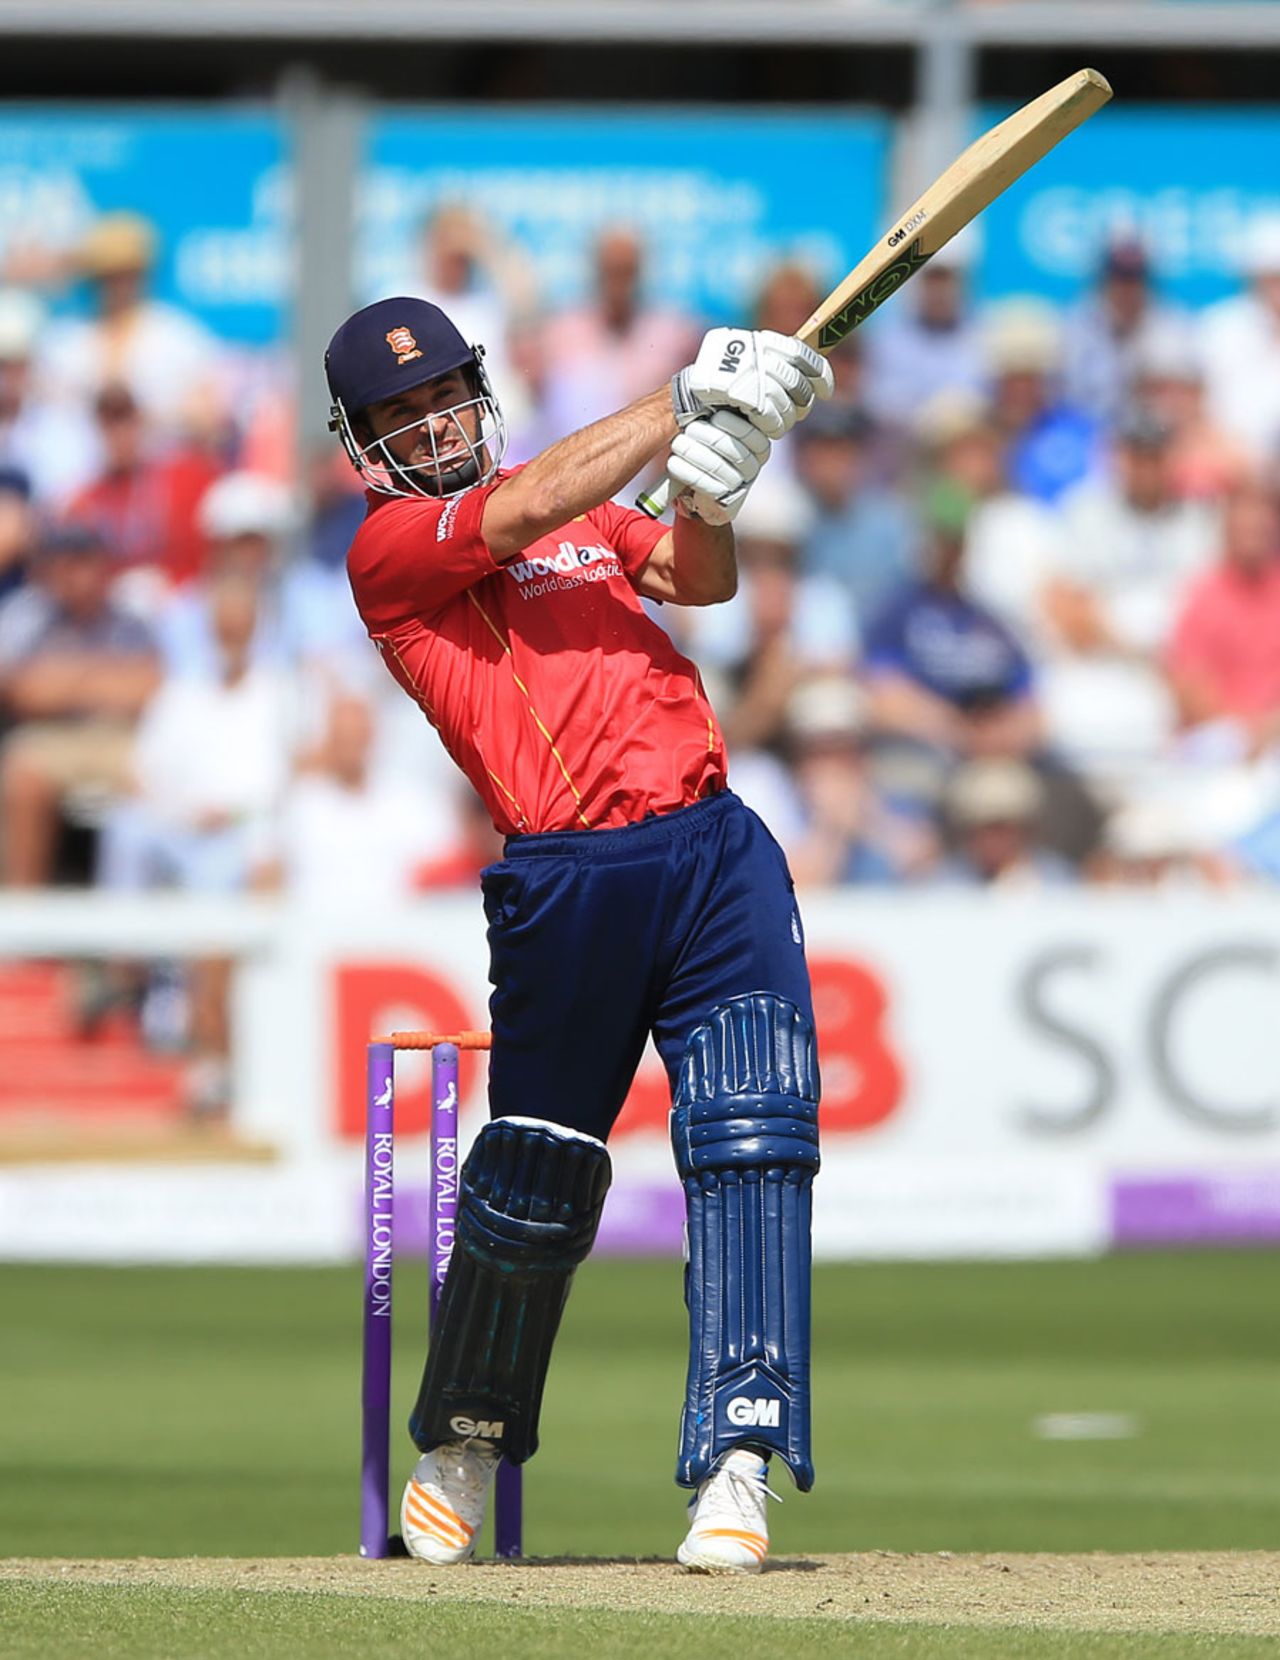 Ryan ten Doeschate on the attack, Essex v Nottinghamshire, Royal London Cup semi-final, Chelmsford, June 16, 2017